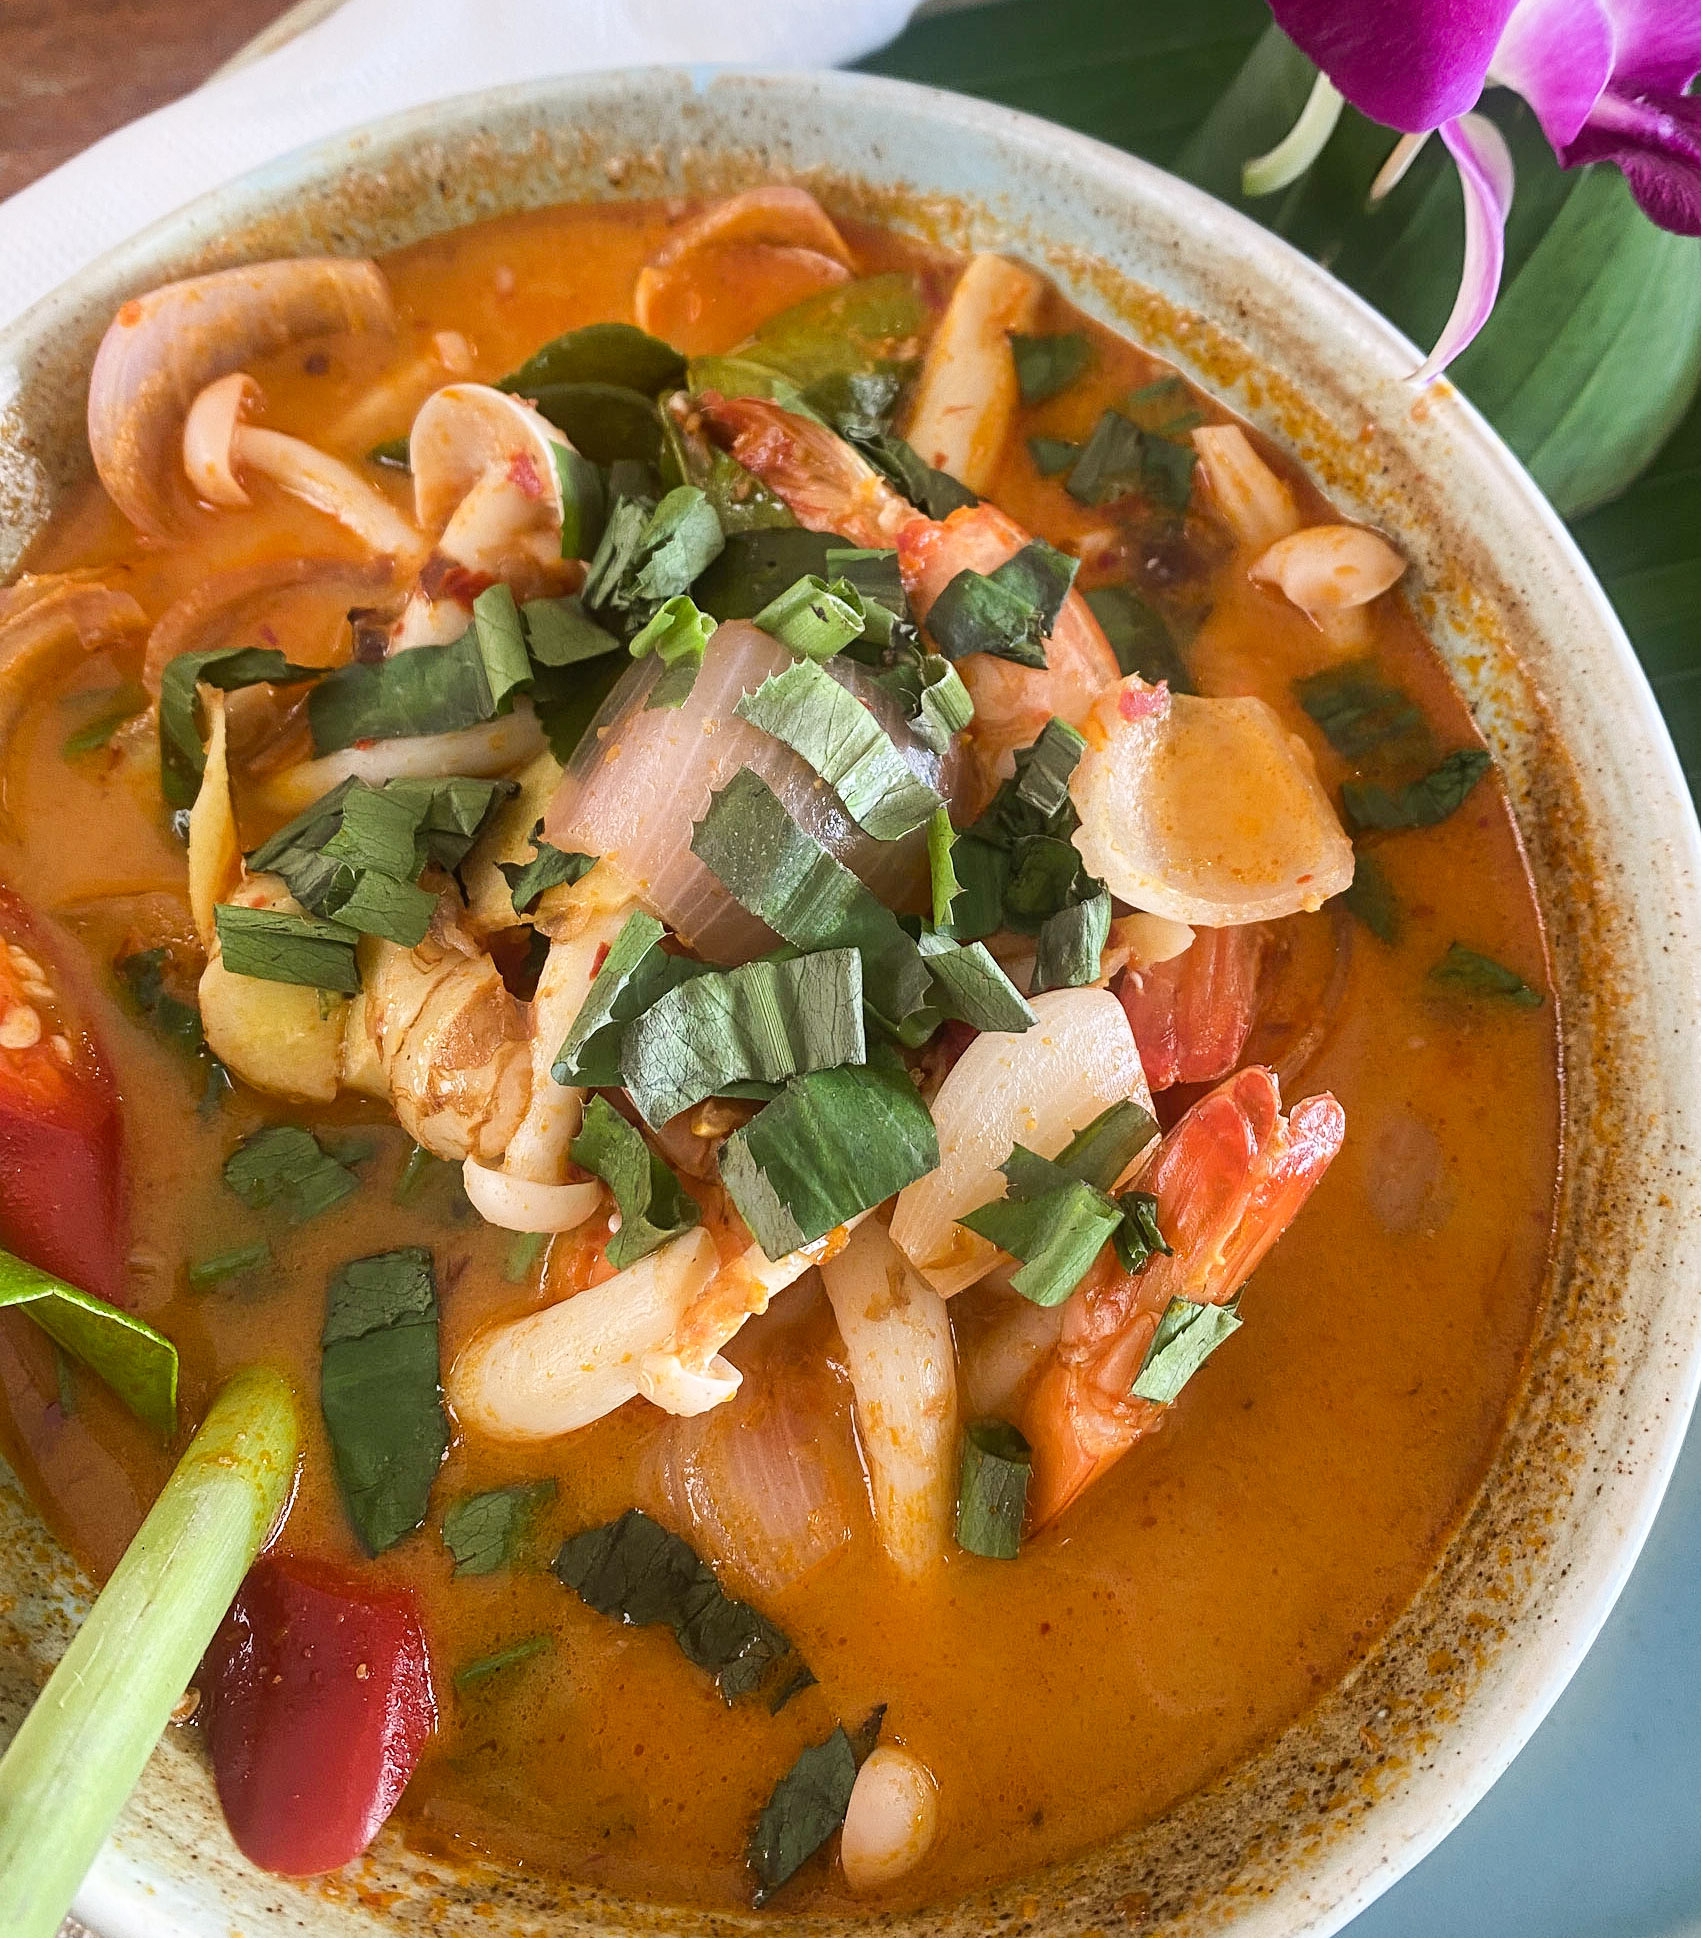 Tom Yum Soup is one dish you need to try in Thailand